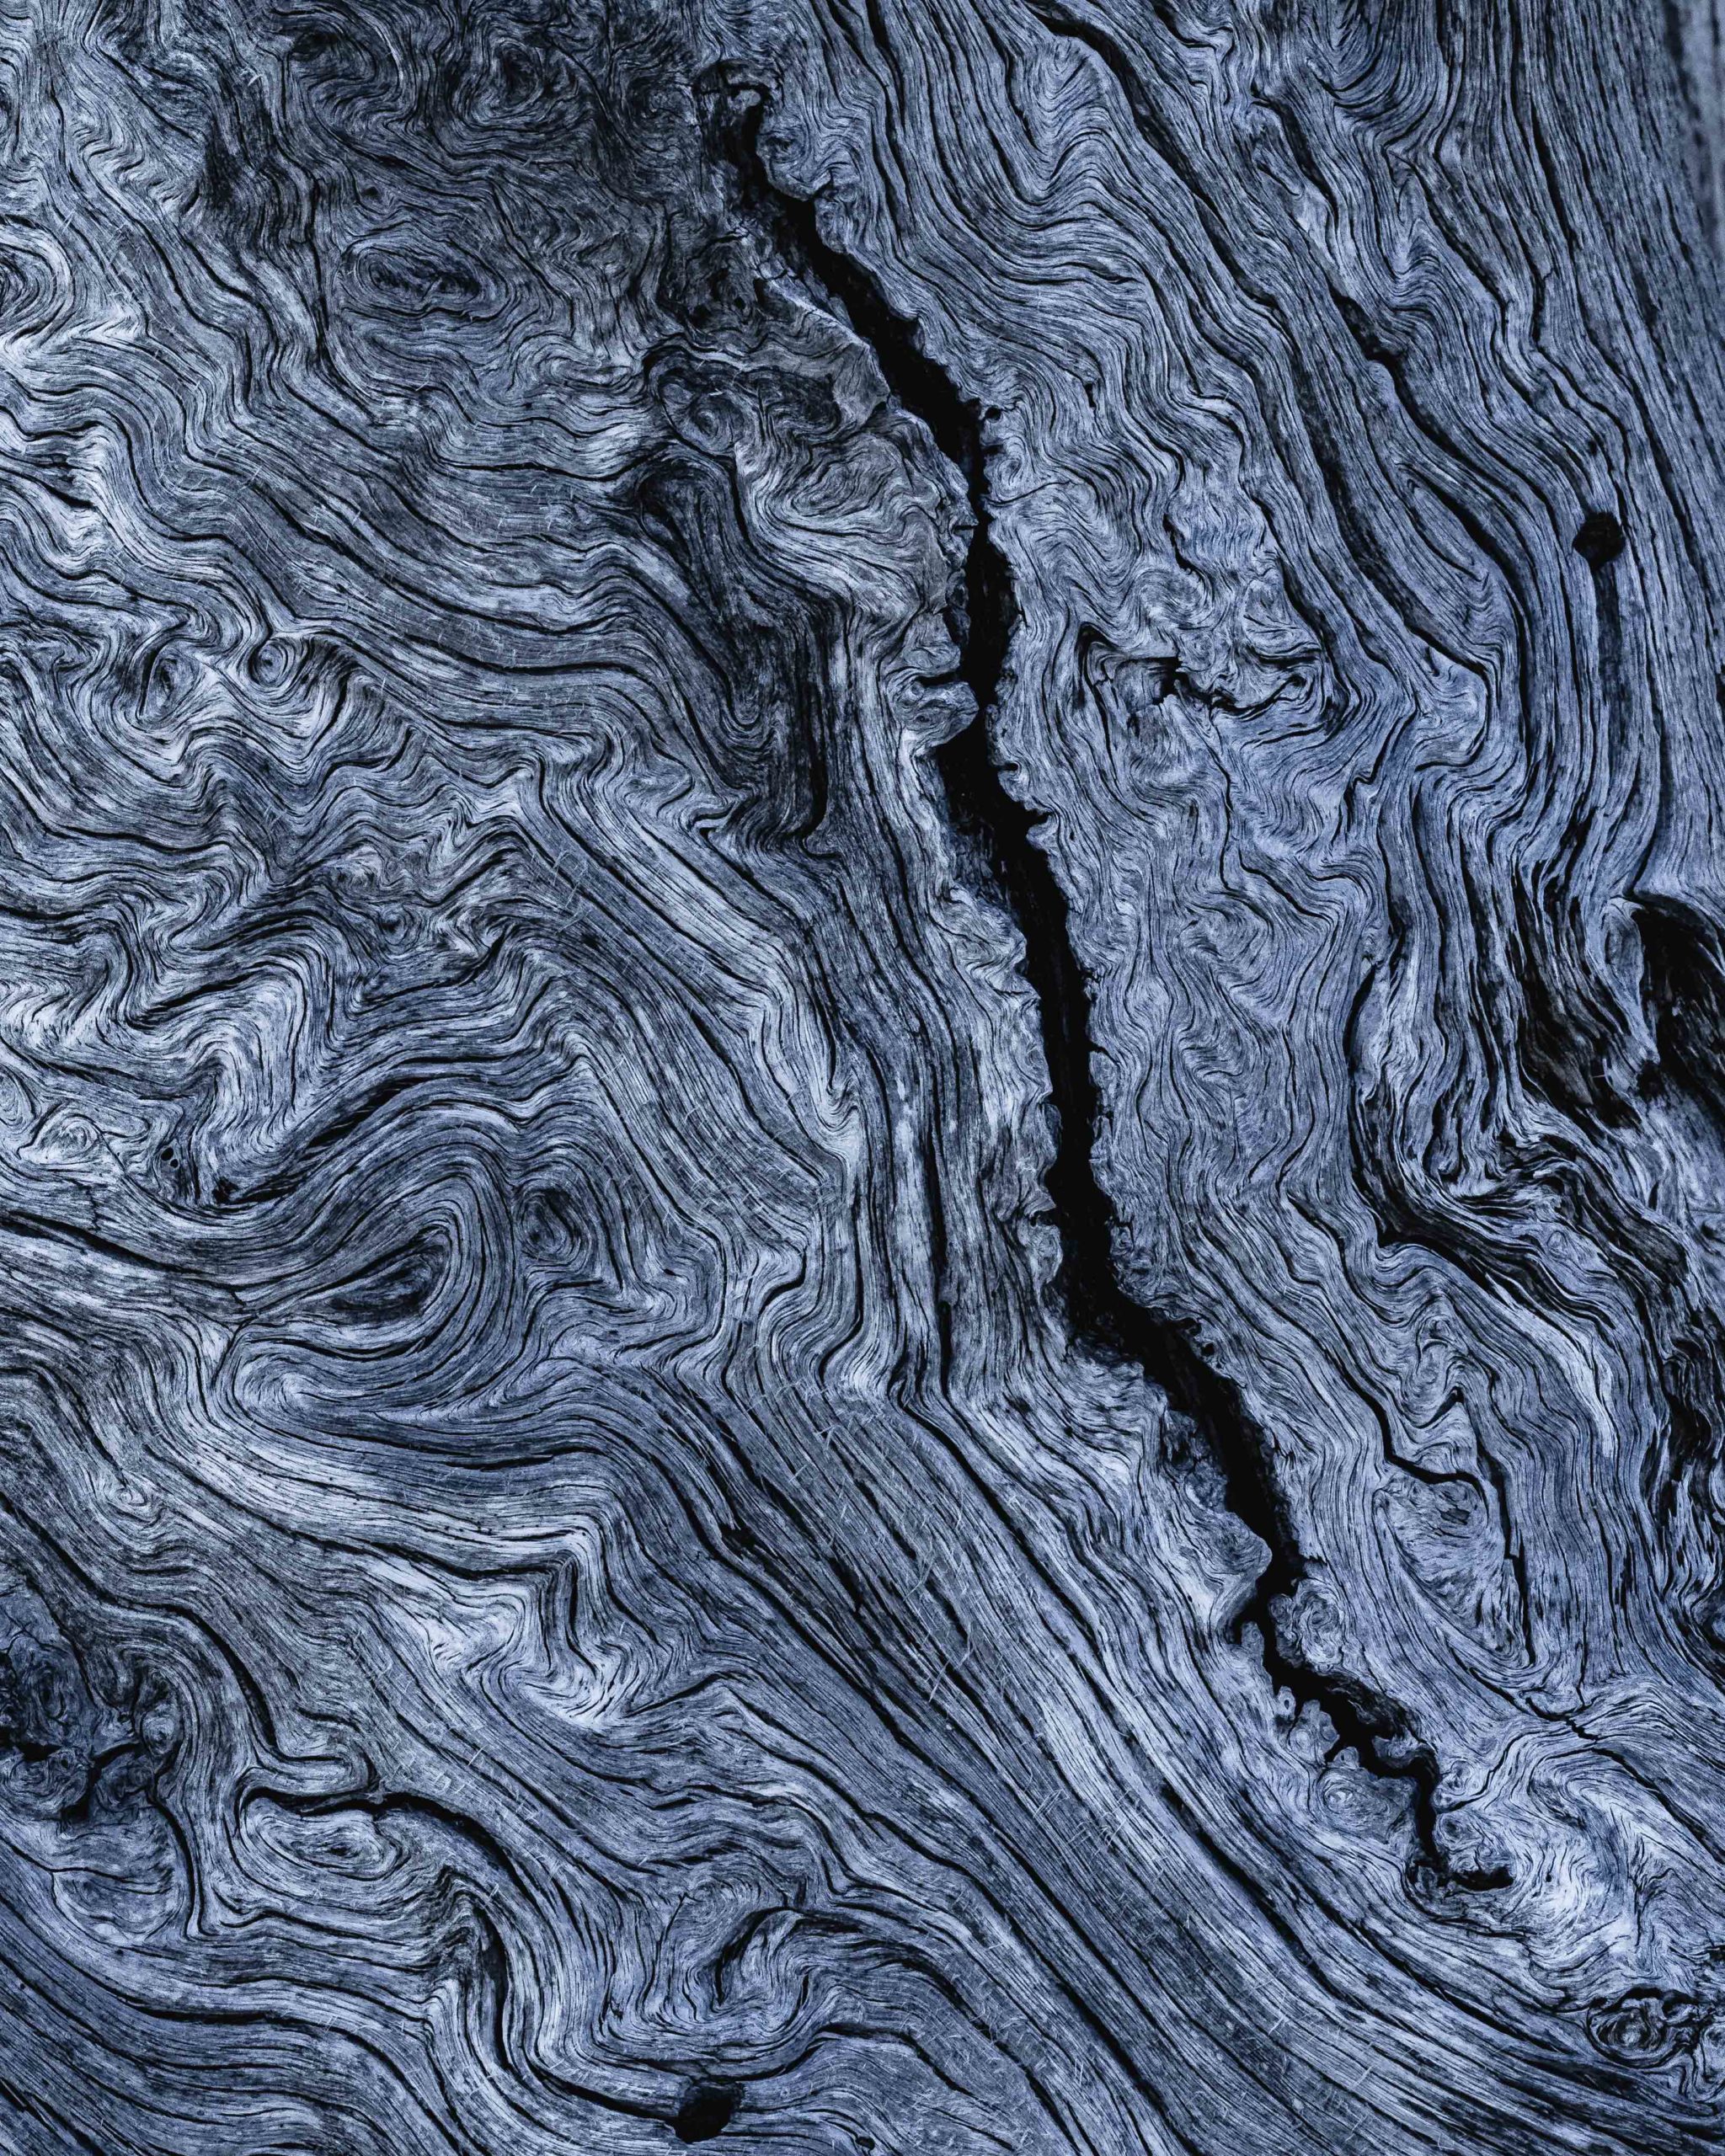 Abstract photography of patterns found on tree bark